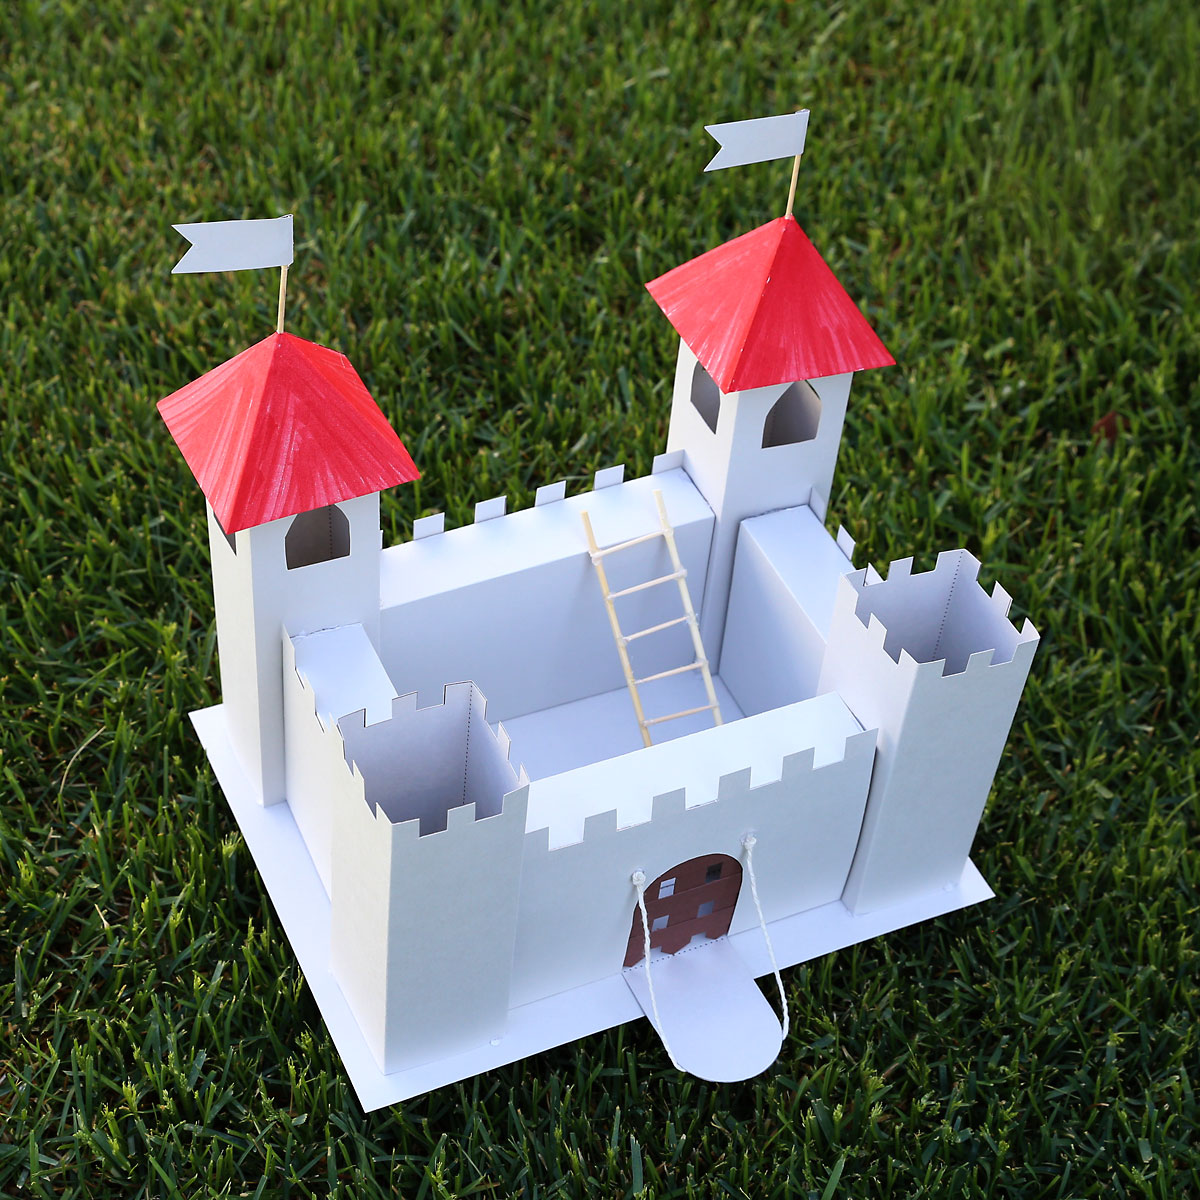 Paper castle sitting on the grass